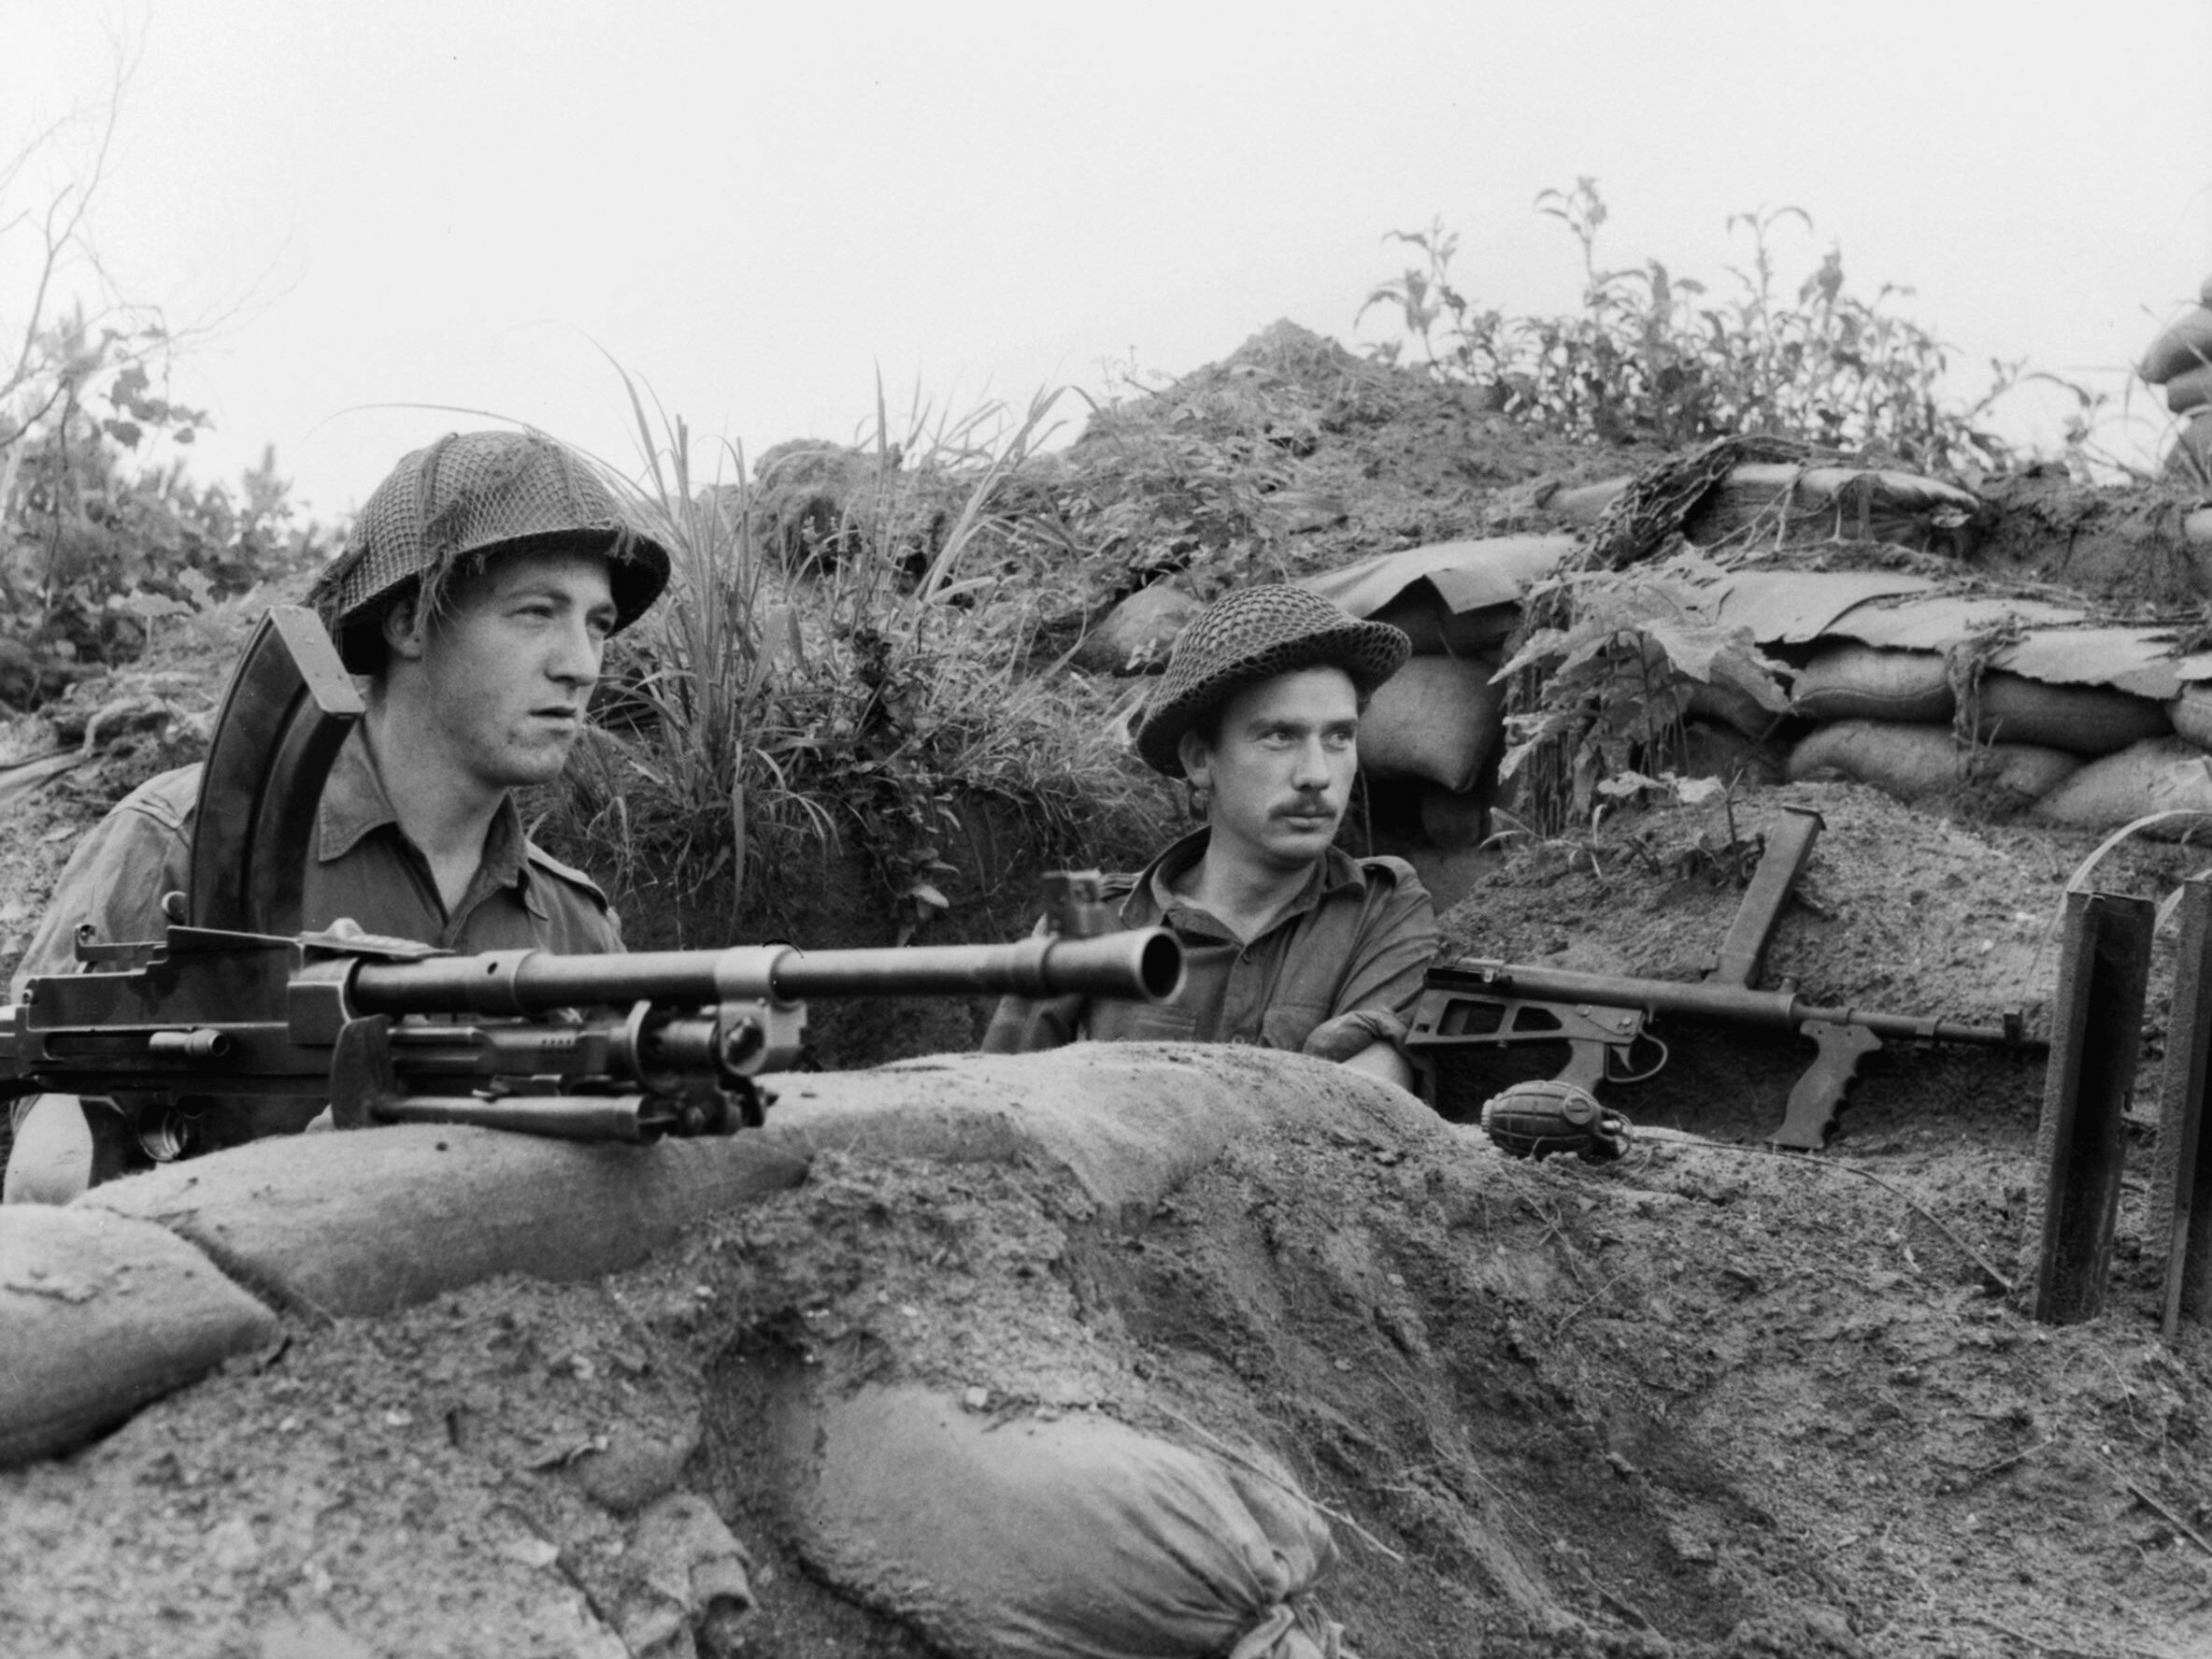 Private Peter Couch and Corporal Bill Laws of the 2nd Battalion, Royal Australian Regiment, look out at enemy lines in the Hook.